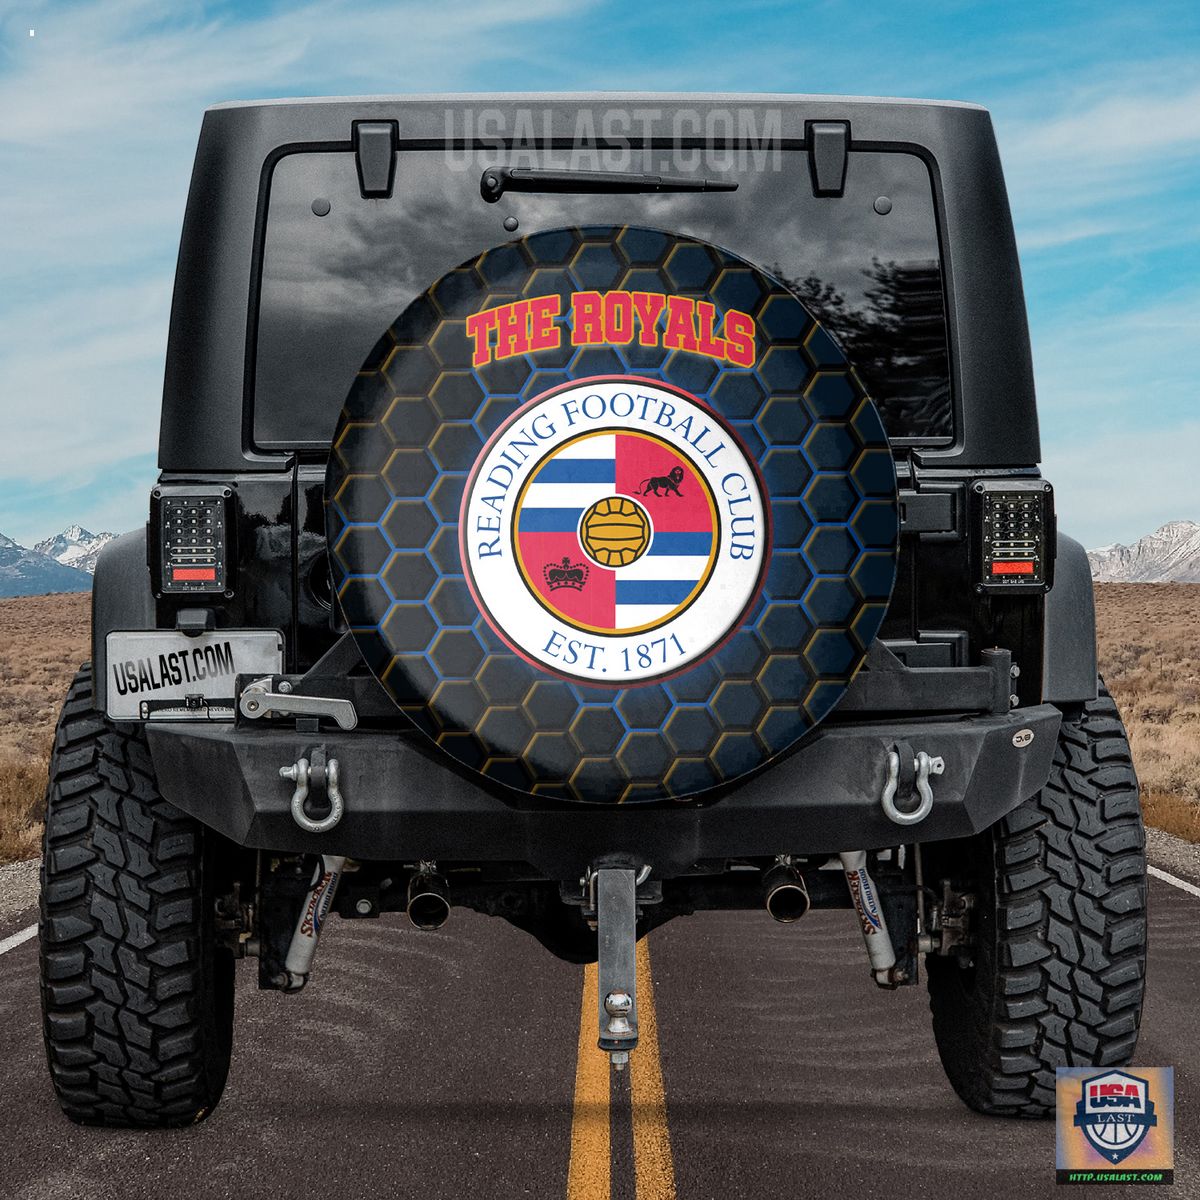 Reading FC Spare Tire Cover - Cool look bro